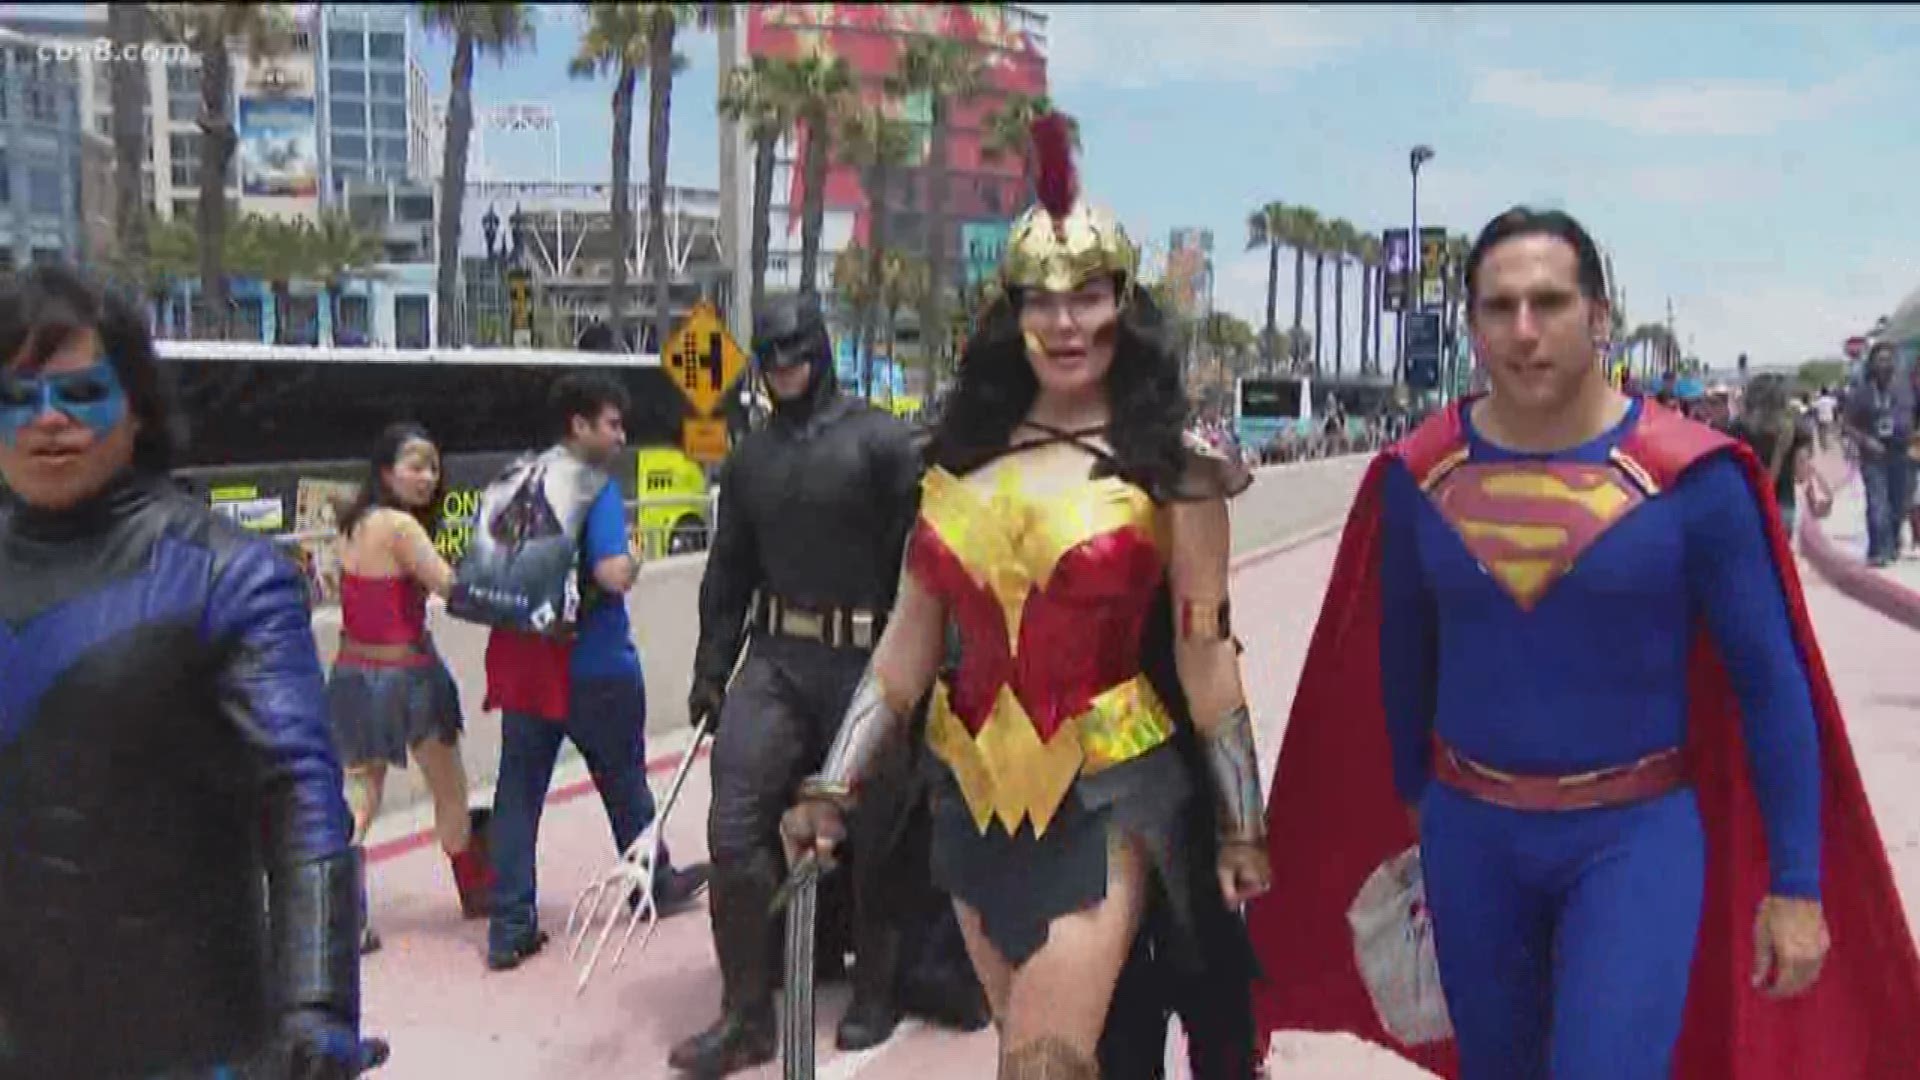 A guide to events outside the convention center during San Diego Comic-Con 2019.